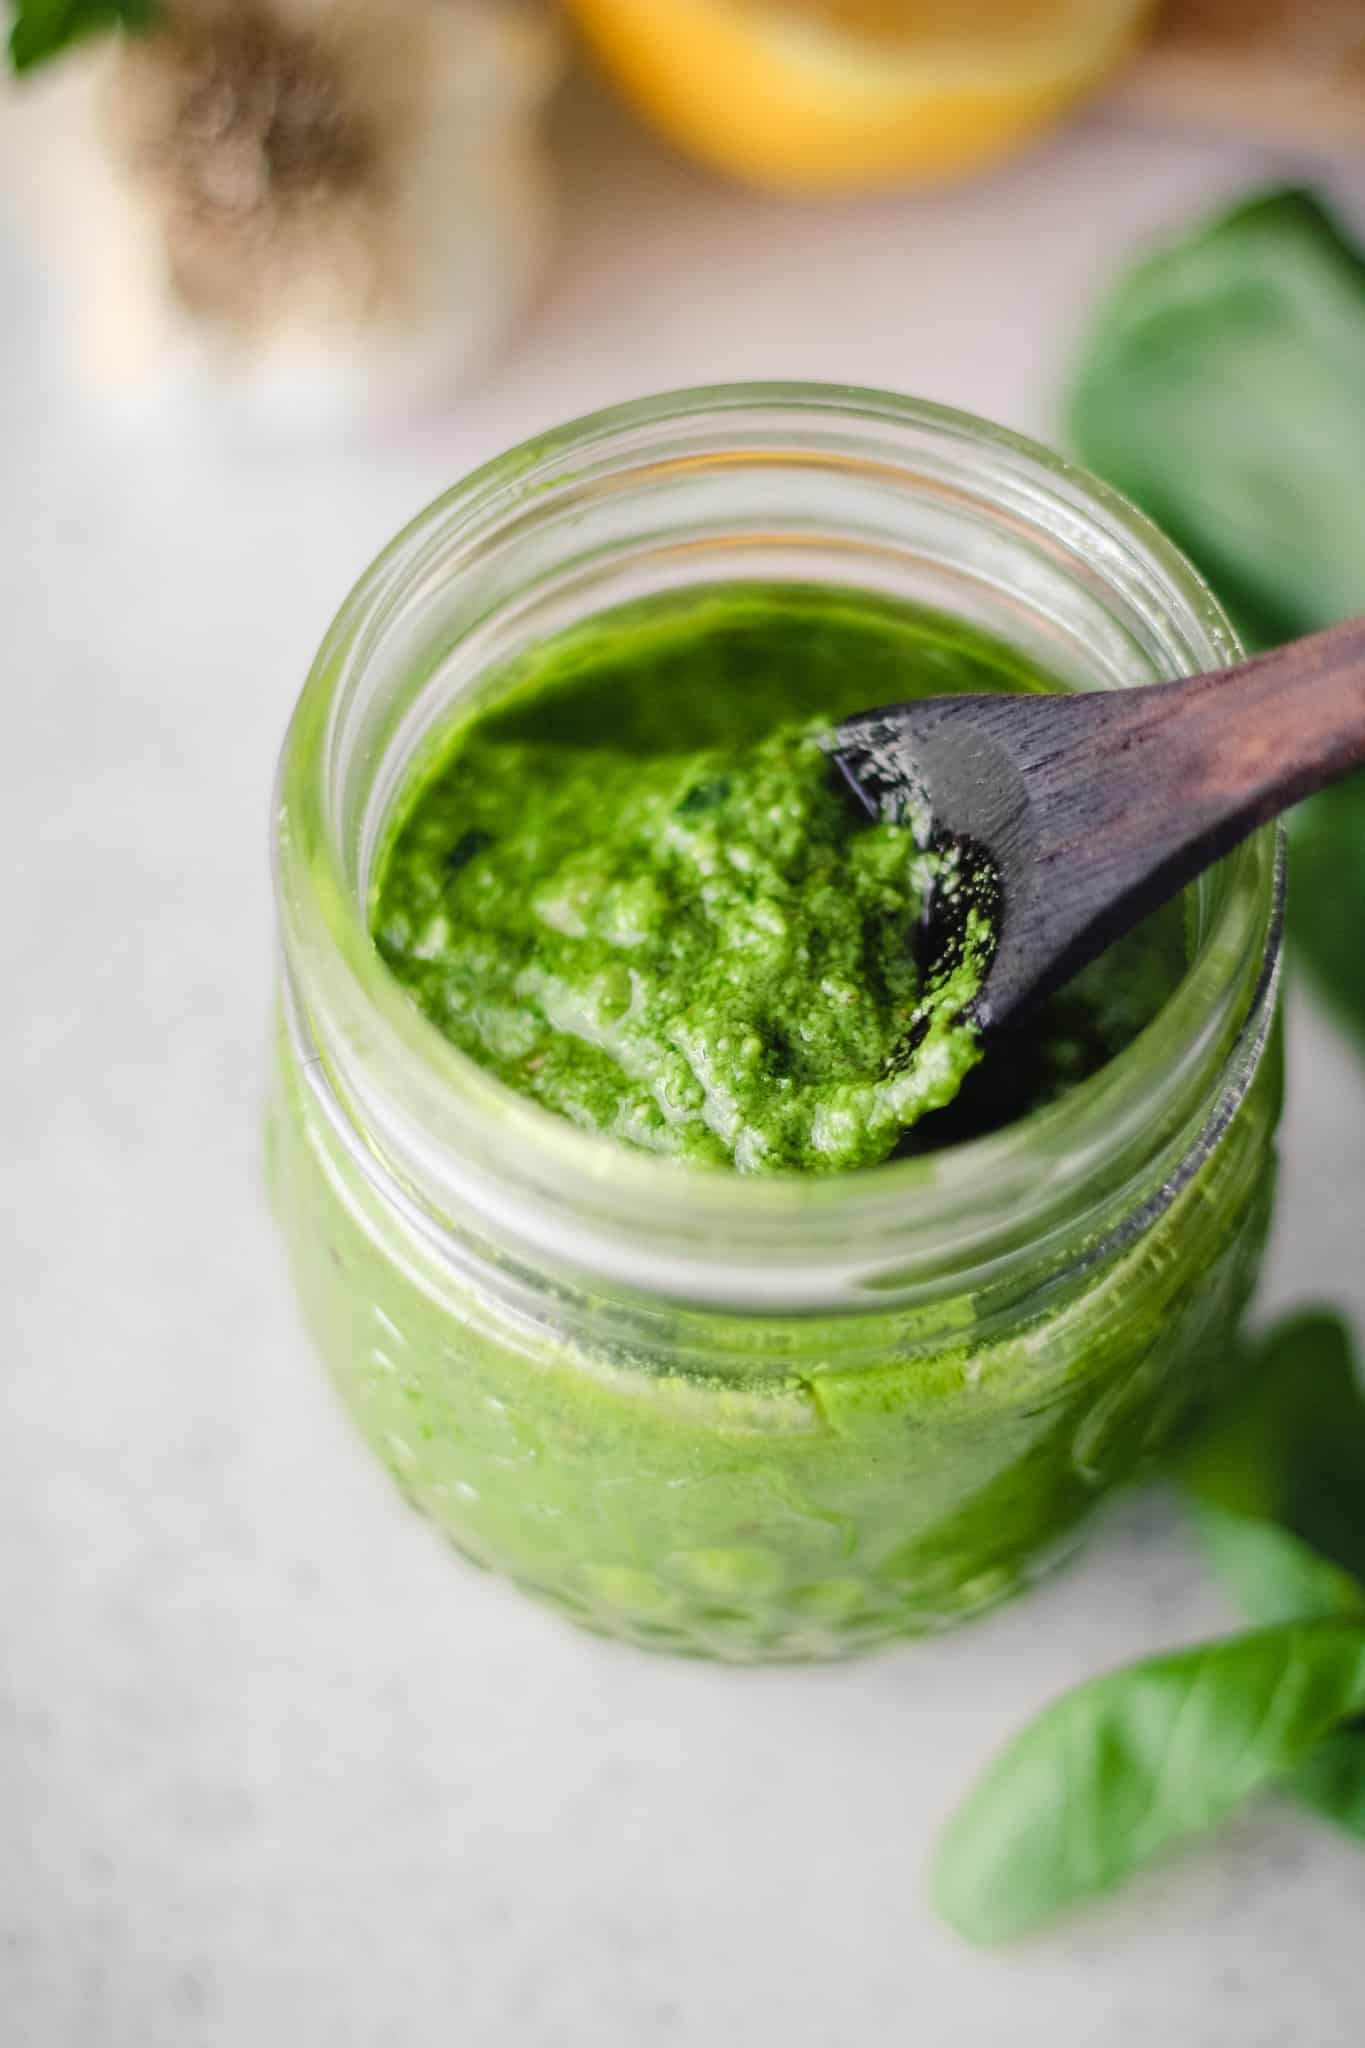 Green pesto sauce in a jar with a wooden spoon.